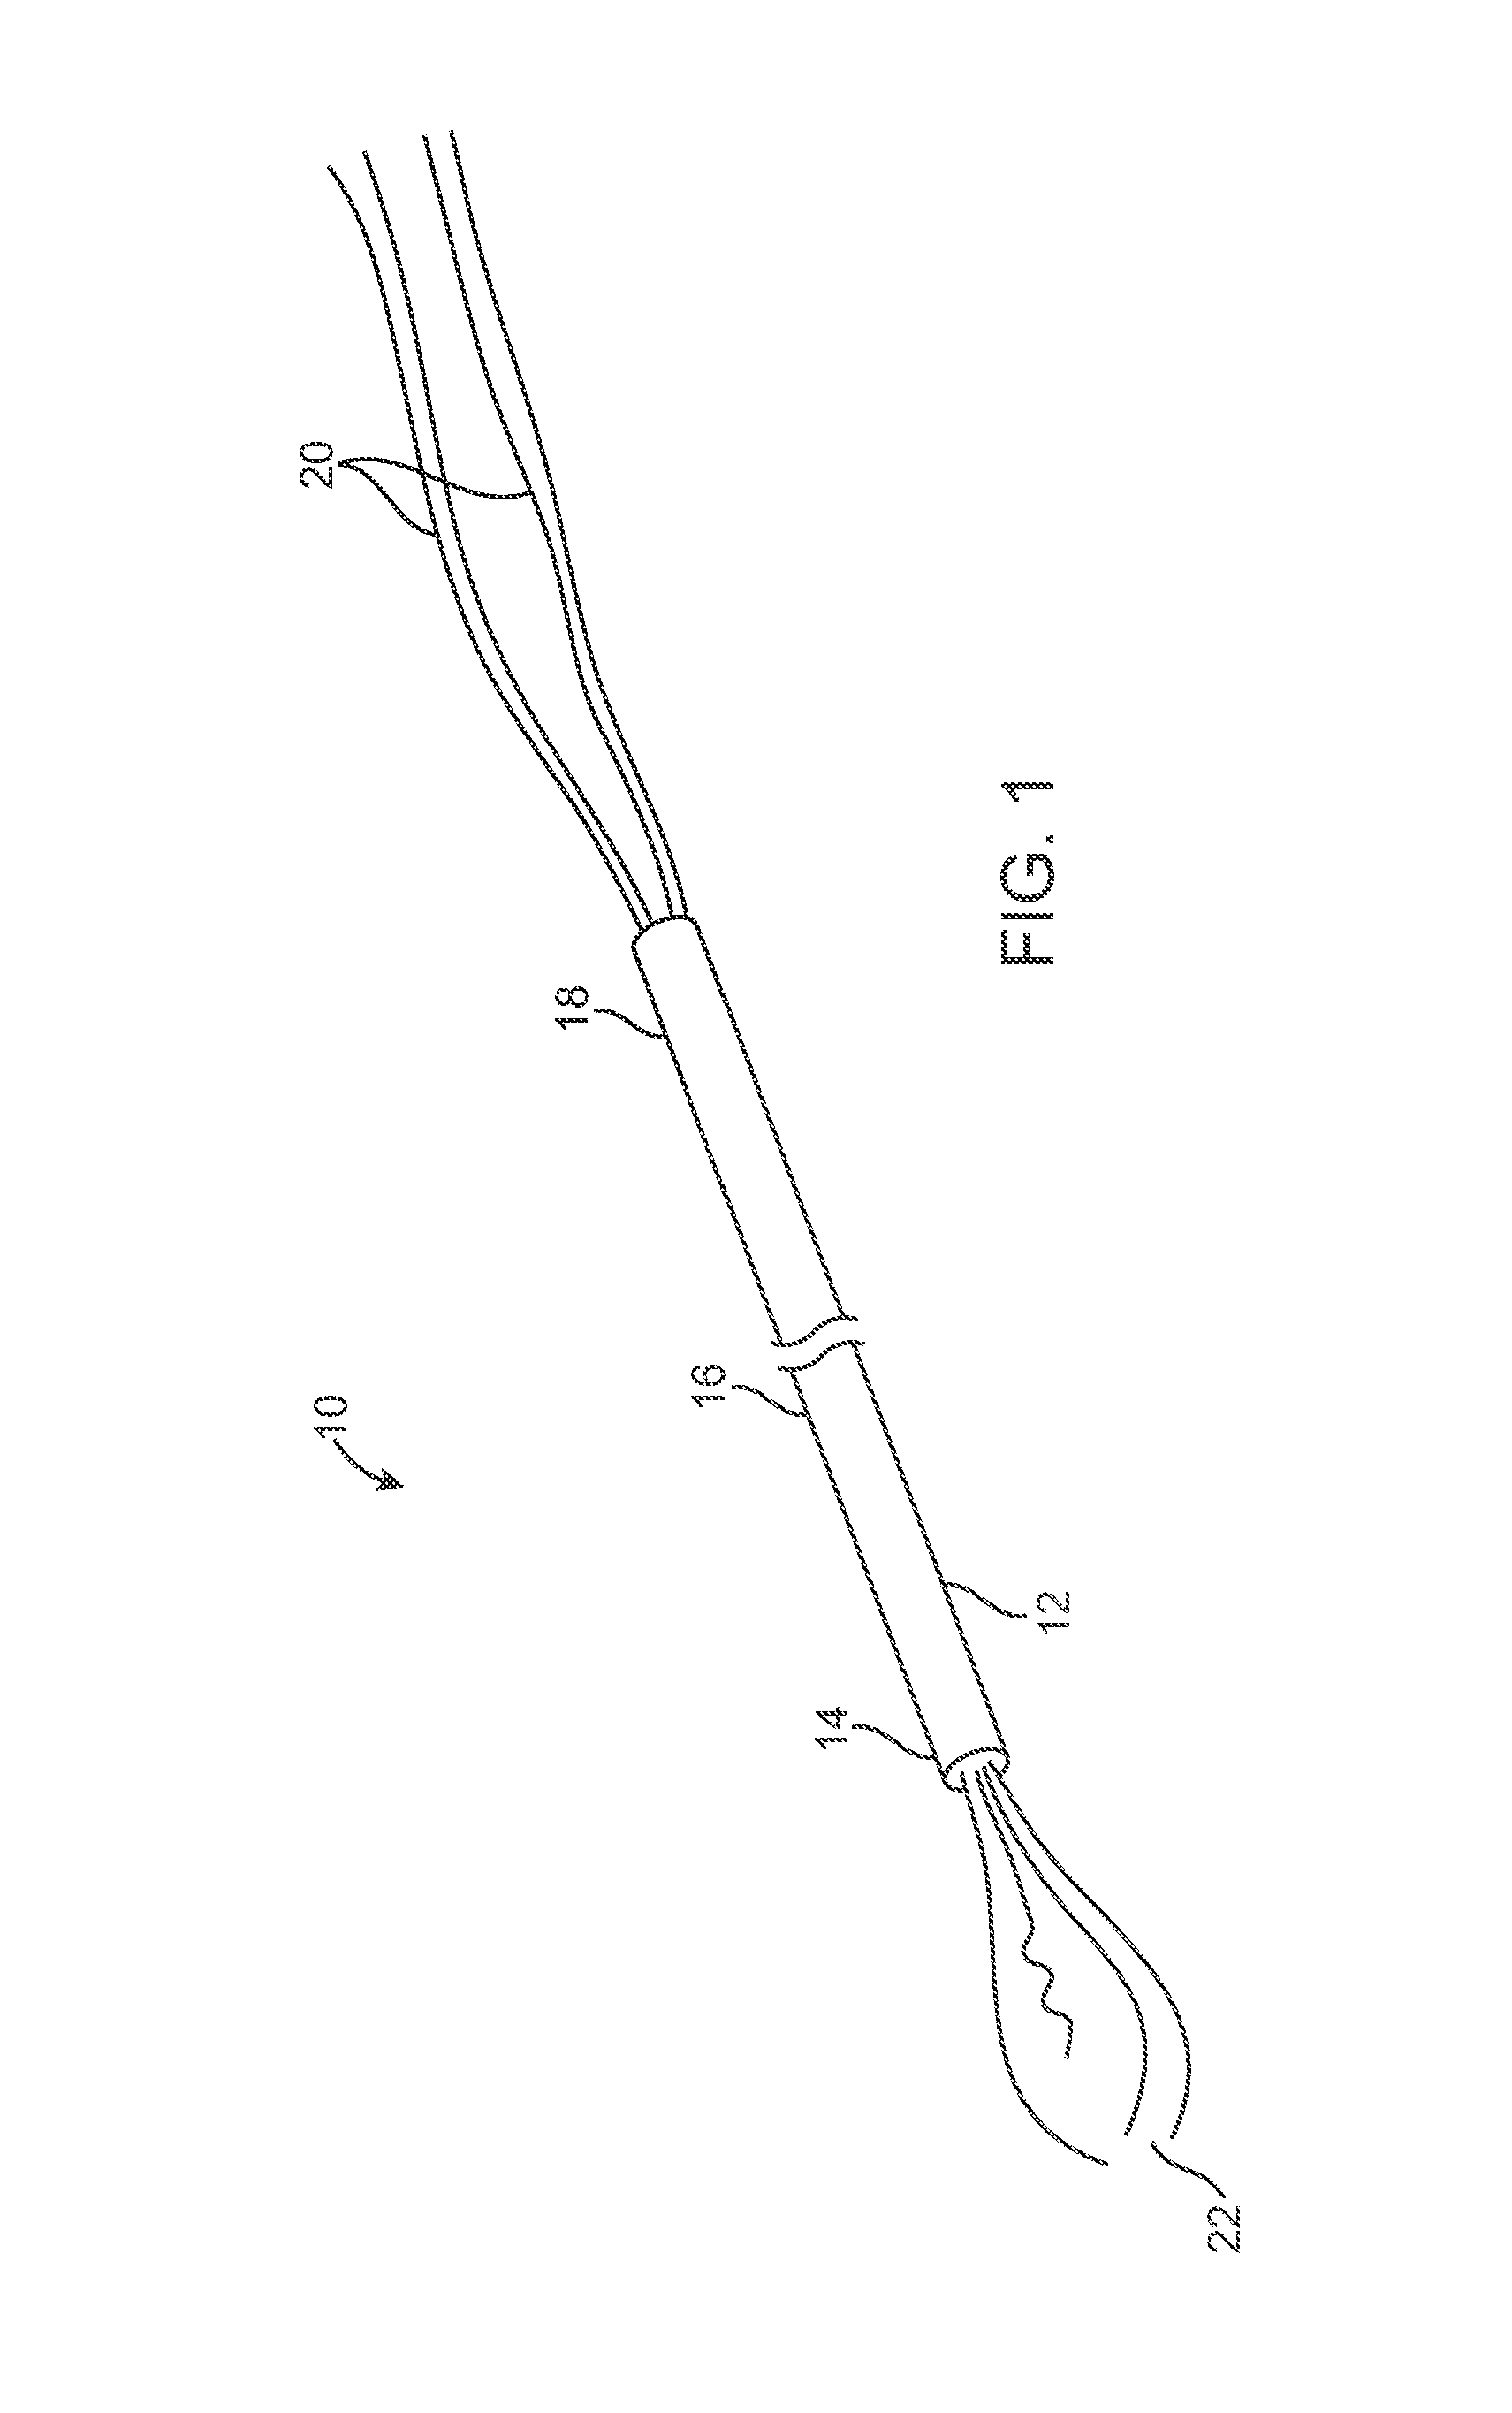 Ablation probe with deployable electrodes